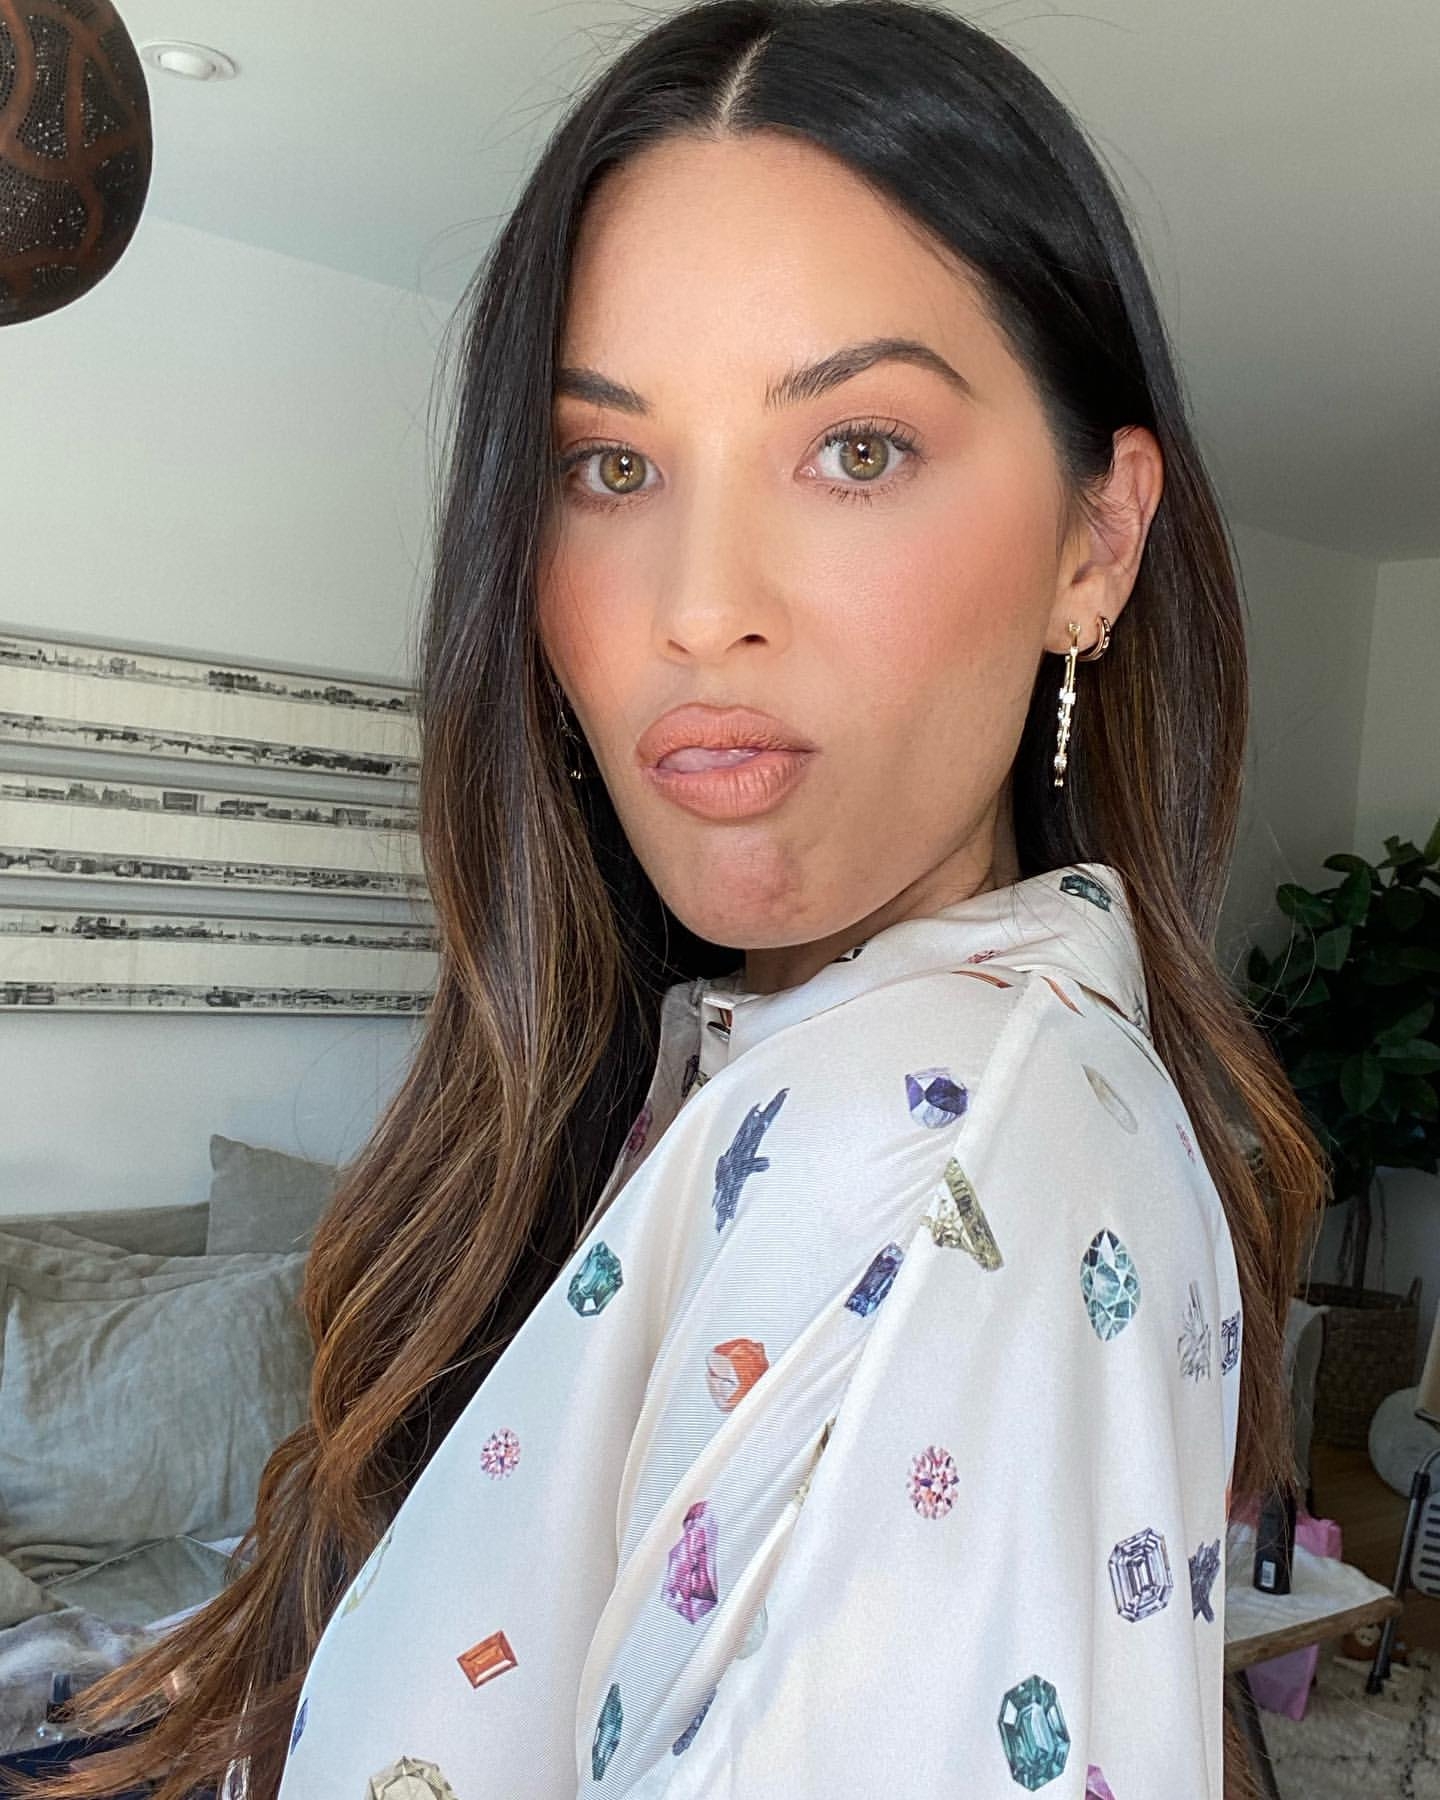 Photos n°3 : Olivia Munn Working on Her Angles!